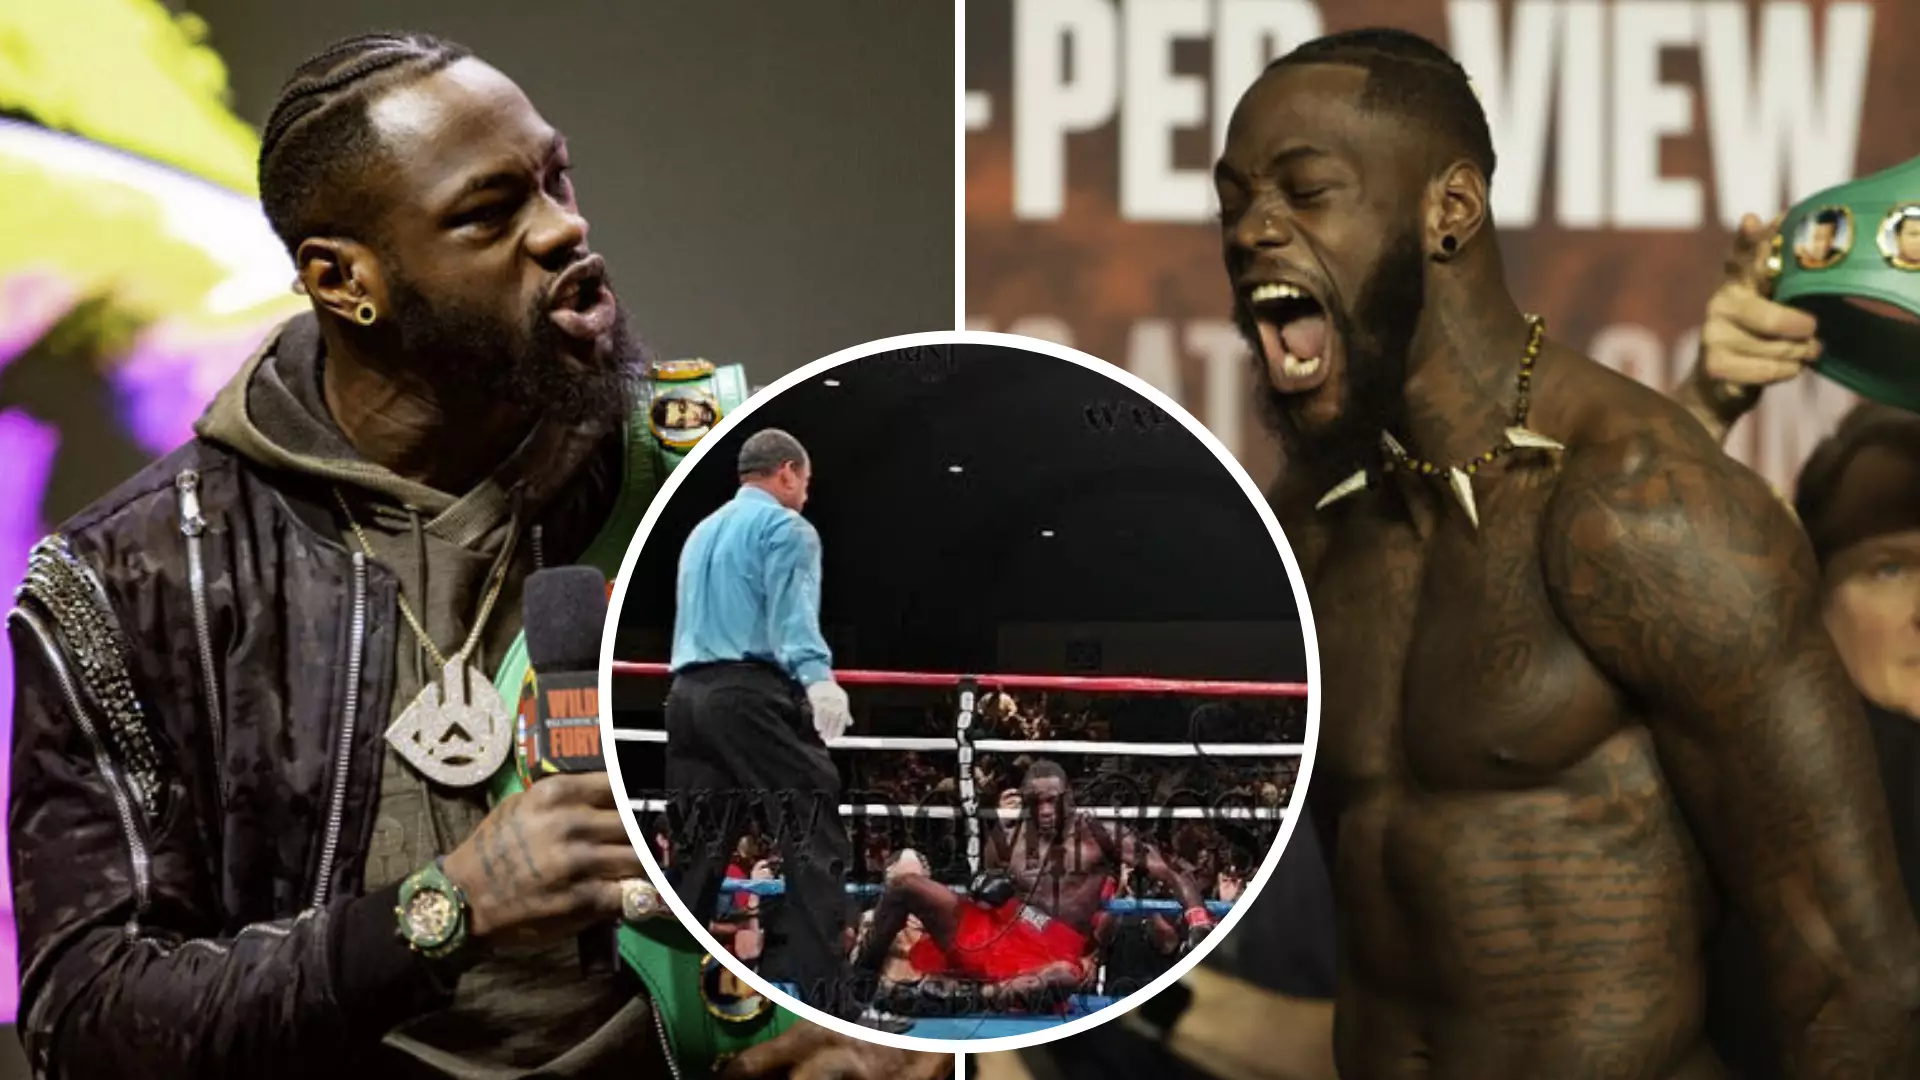 Deontay Wilder Was Left With 'Very Wobbly Legs' After Only Professional Knockdown Of His Career